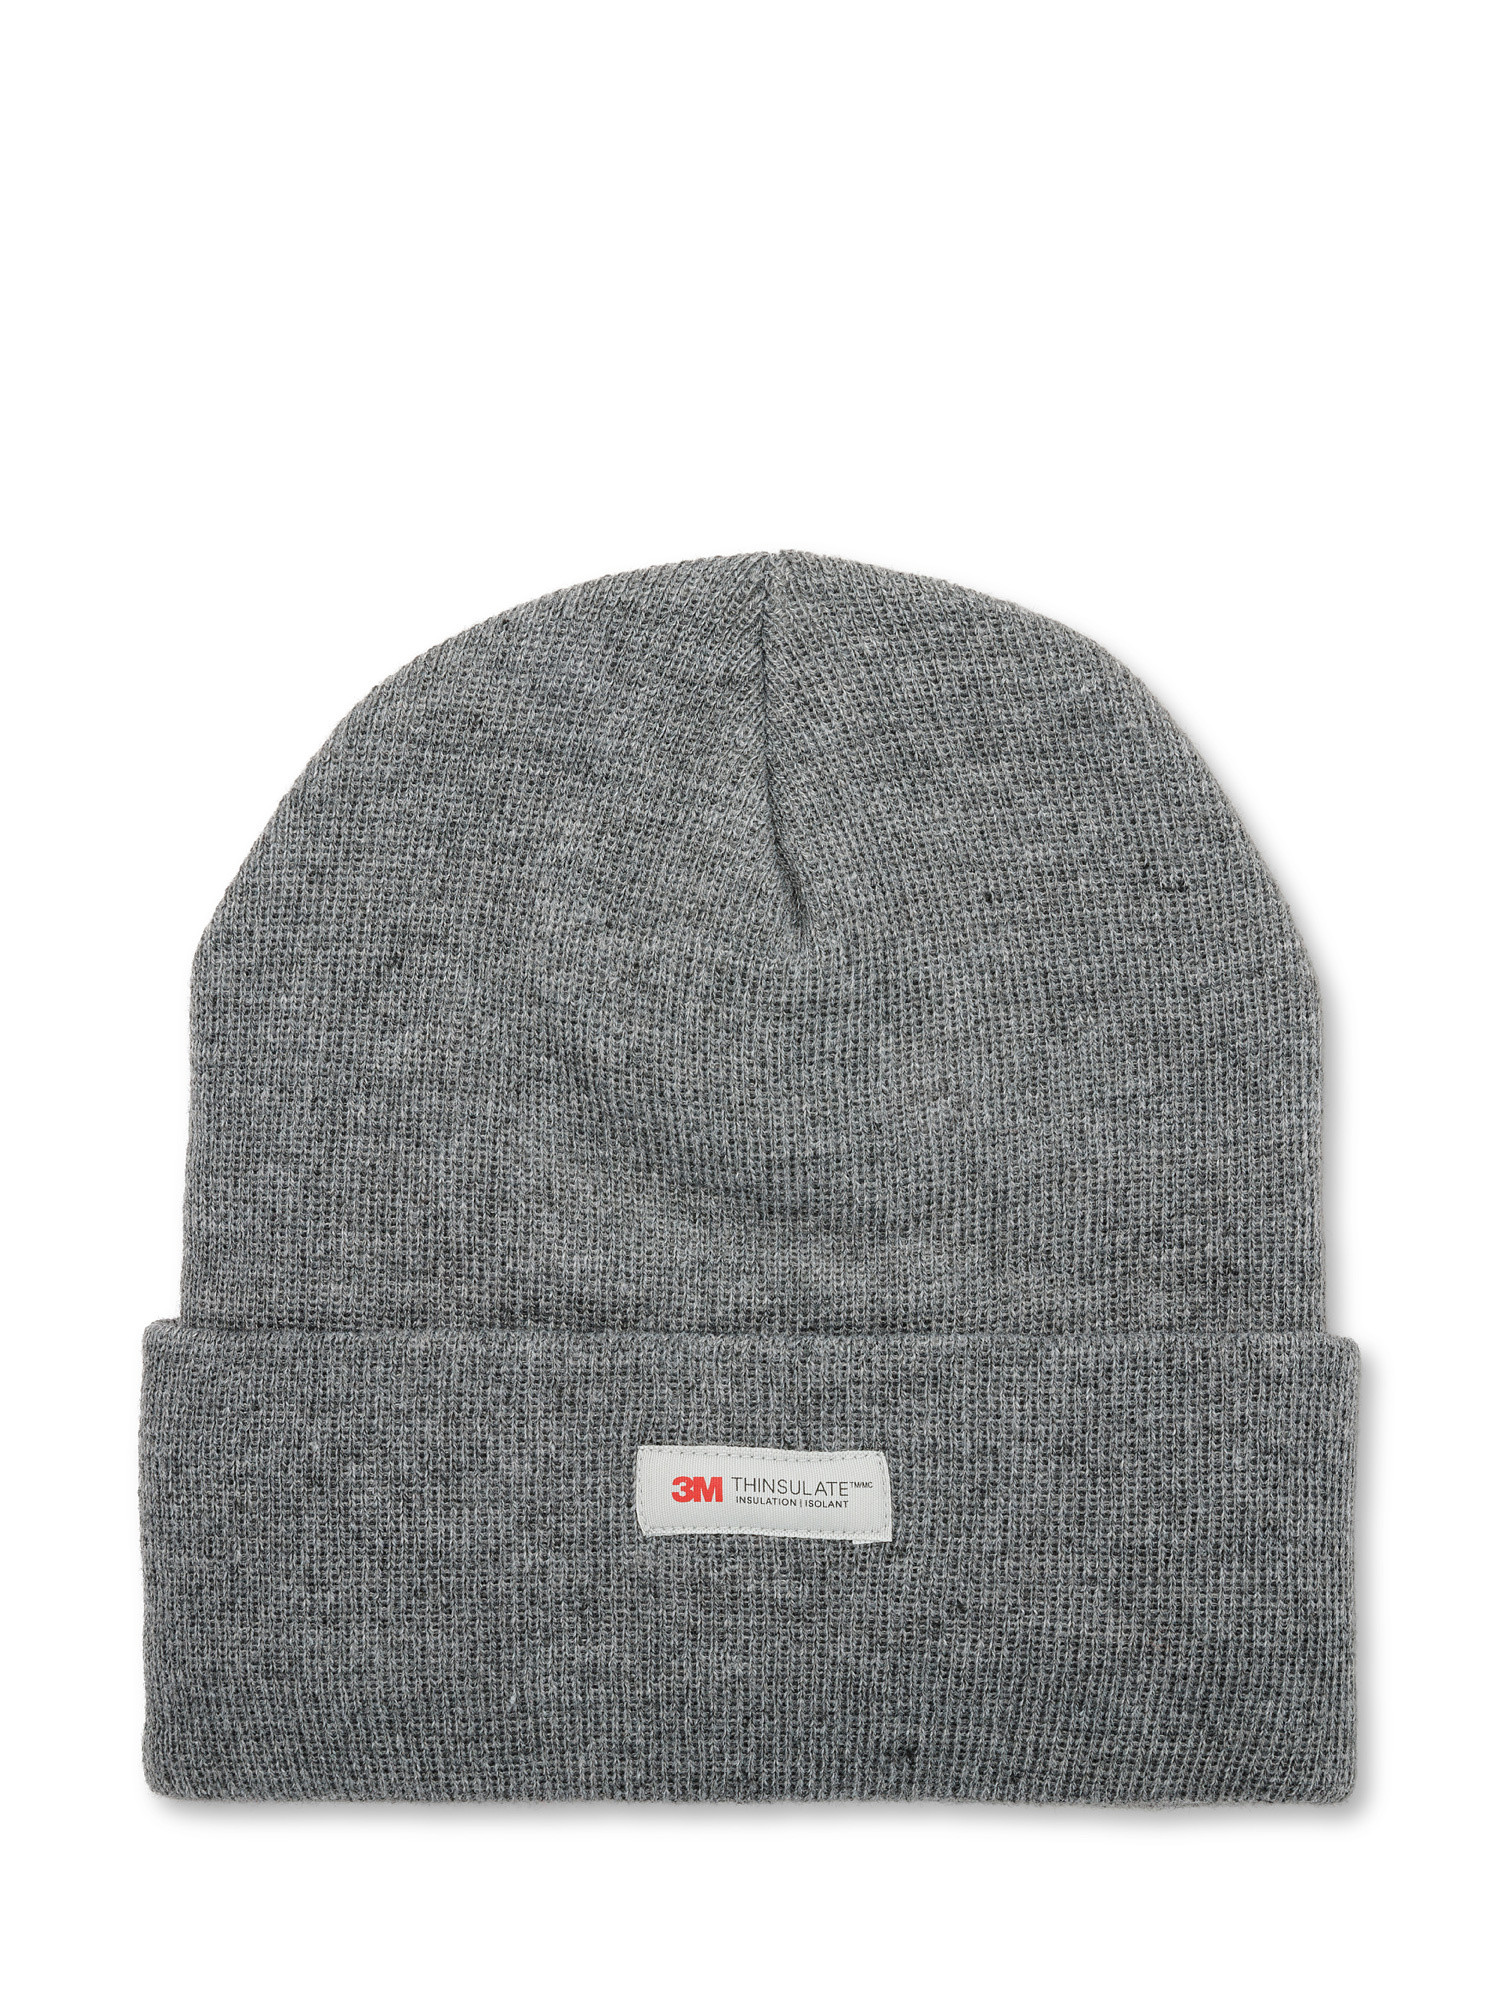 Thinsulate cap, Light Grey, large image number 0